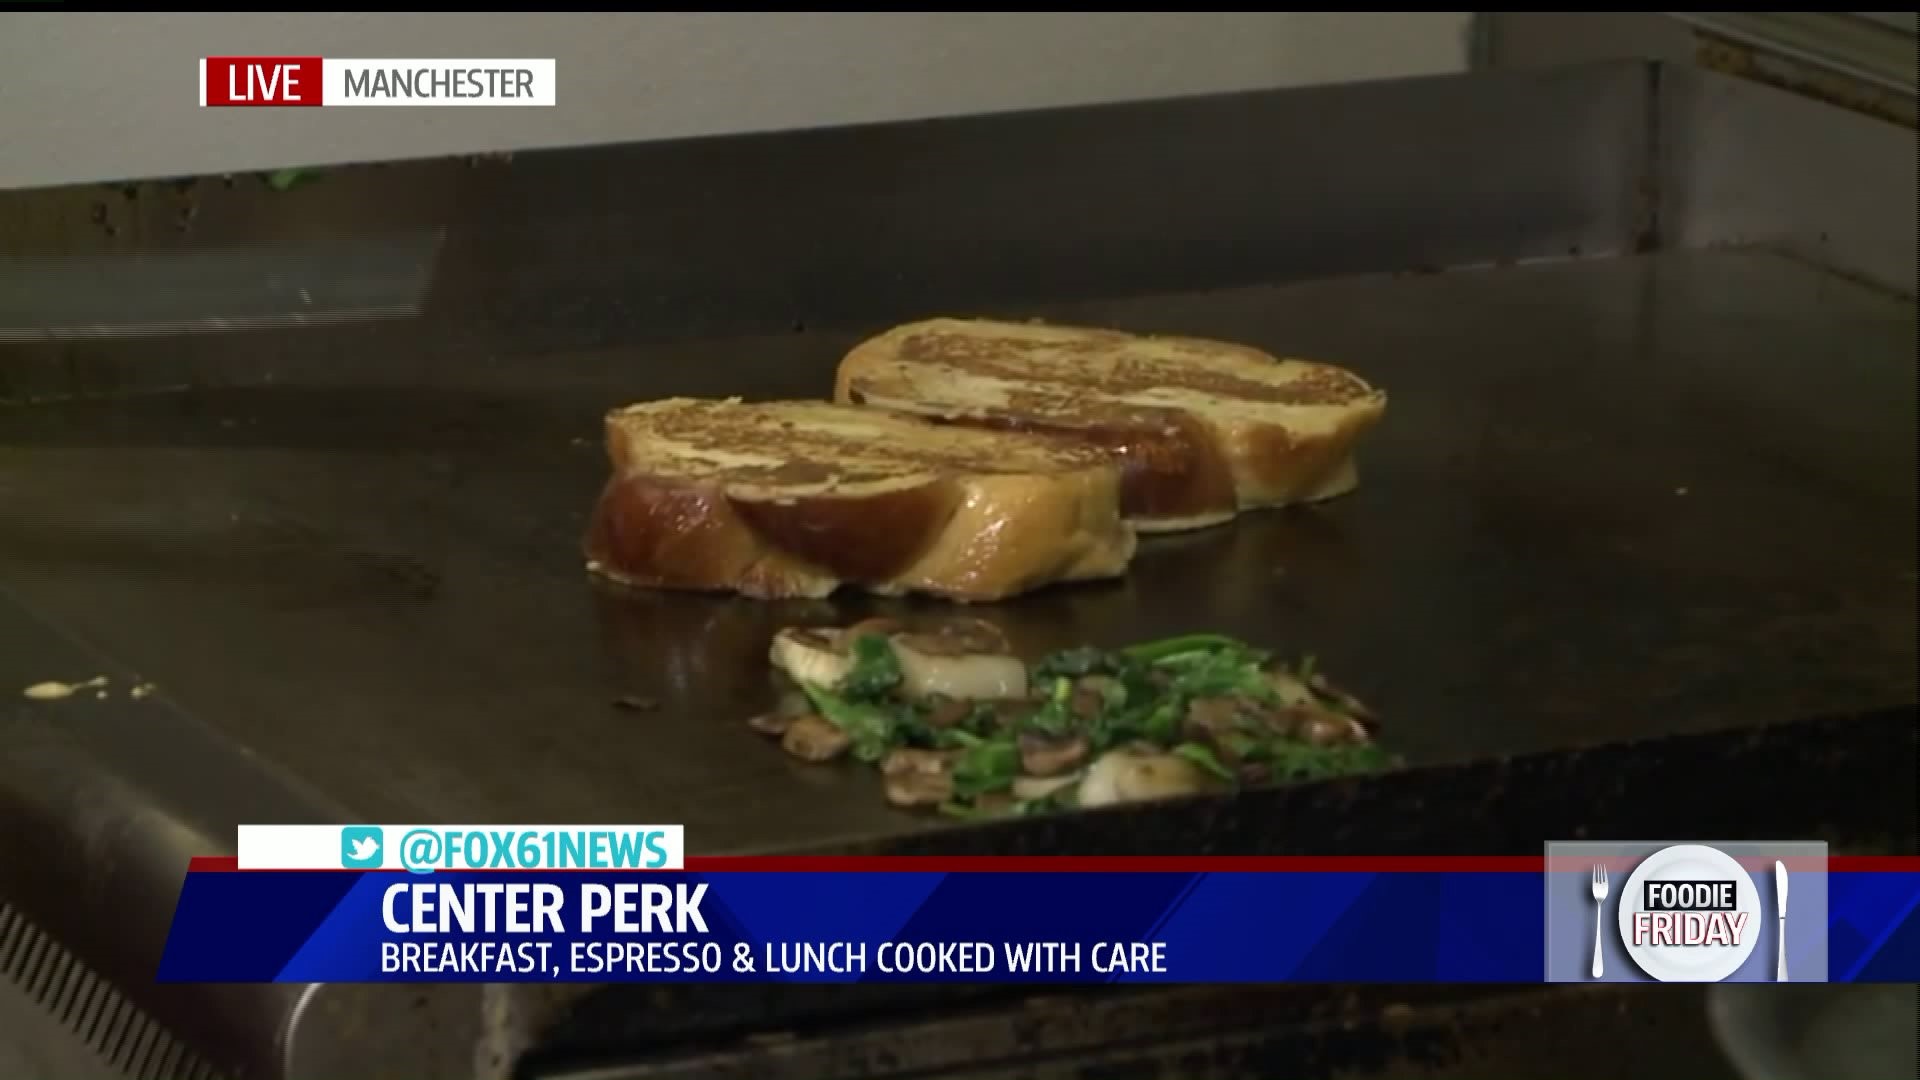 Foodie Friday at Center Perk in Manchester